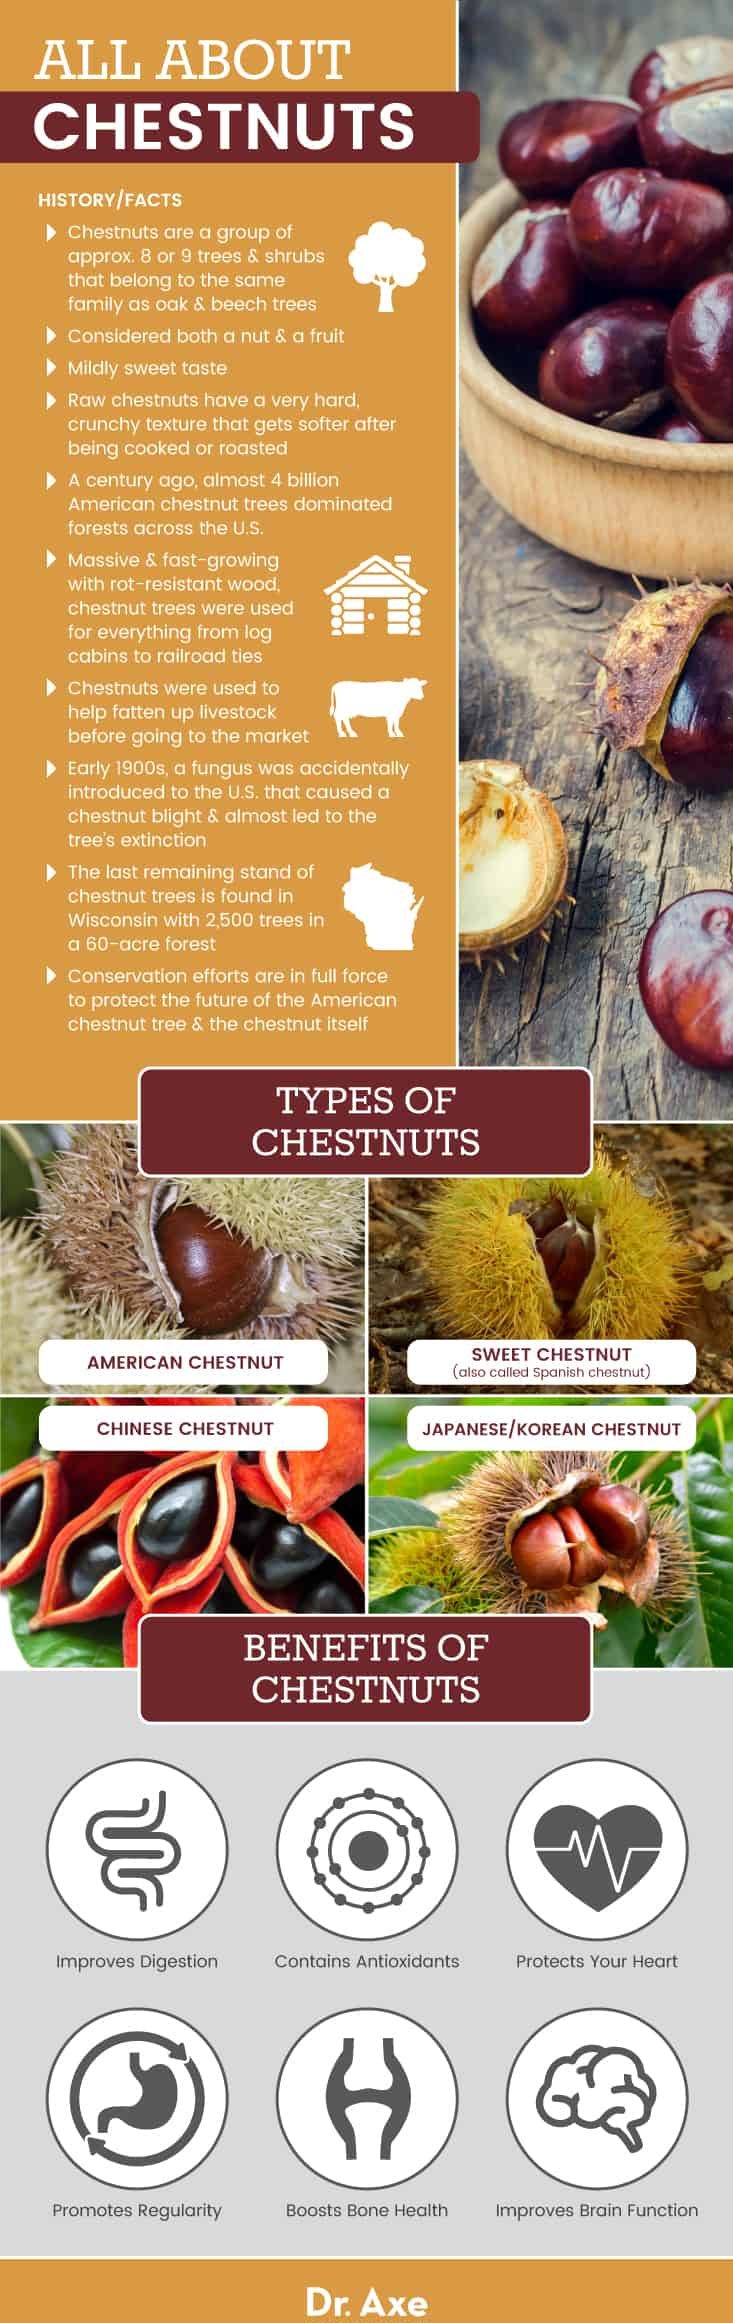 All about chestnuts - Dr. Axe